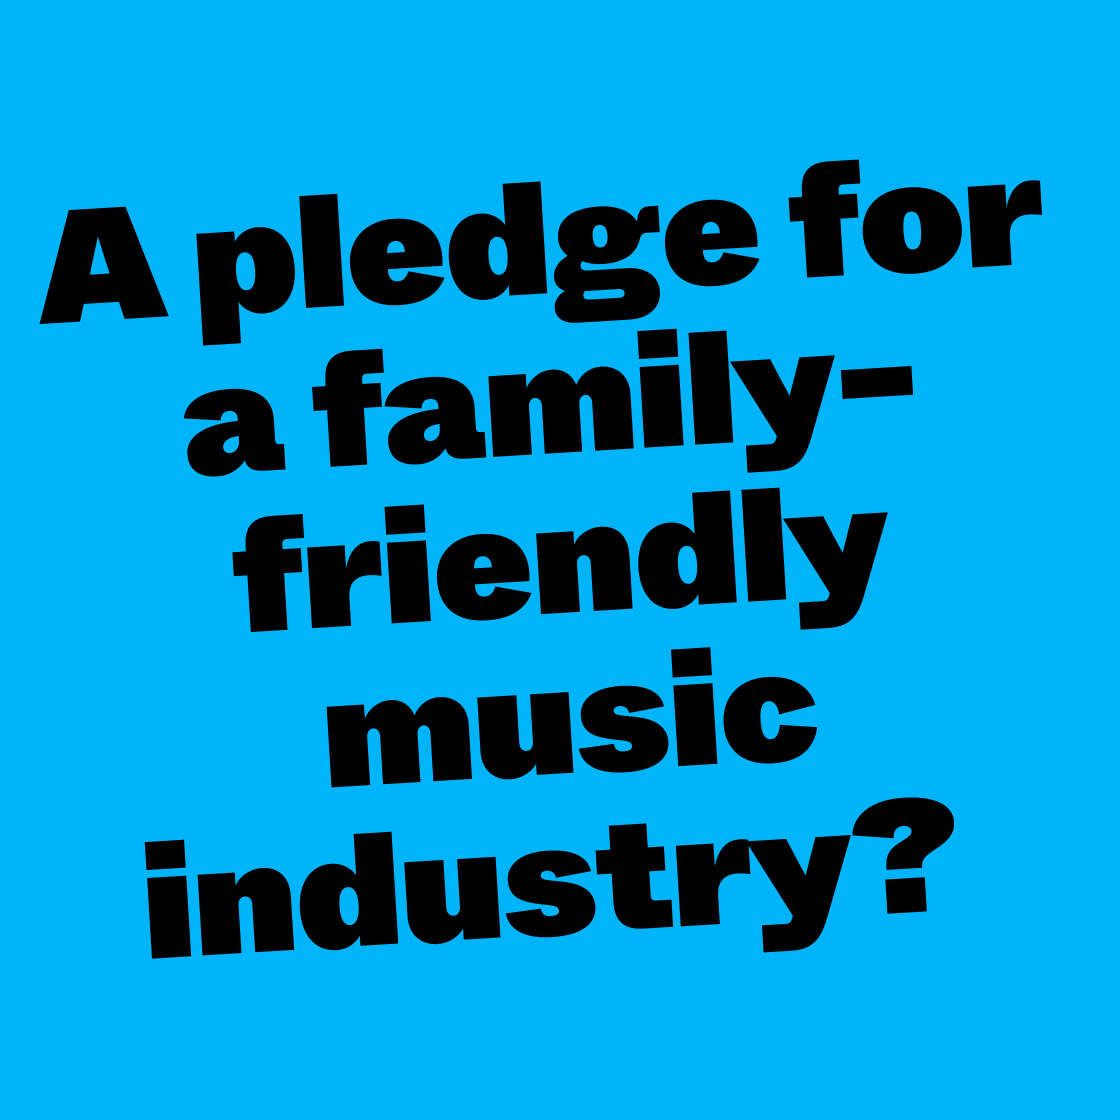 A pledge for a family-friendly music industry (VUT Indie Days)